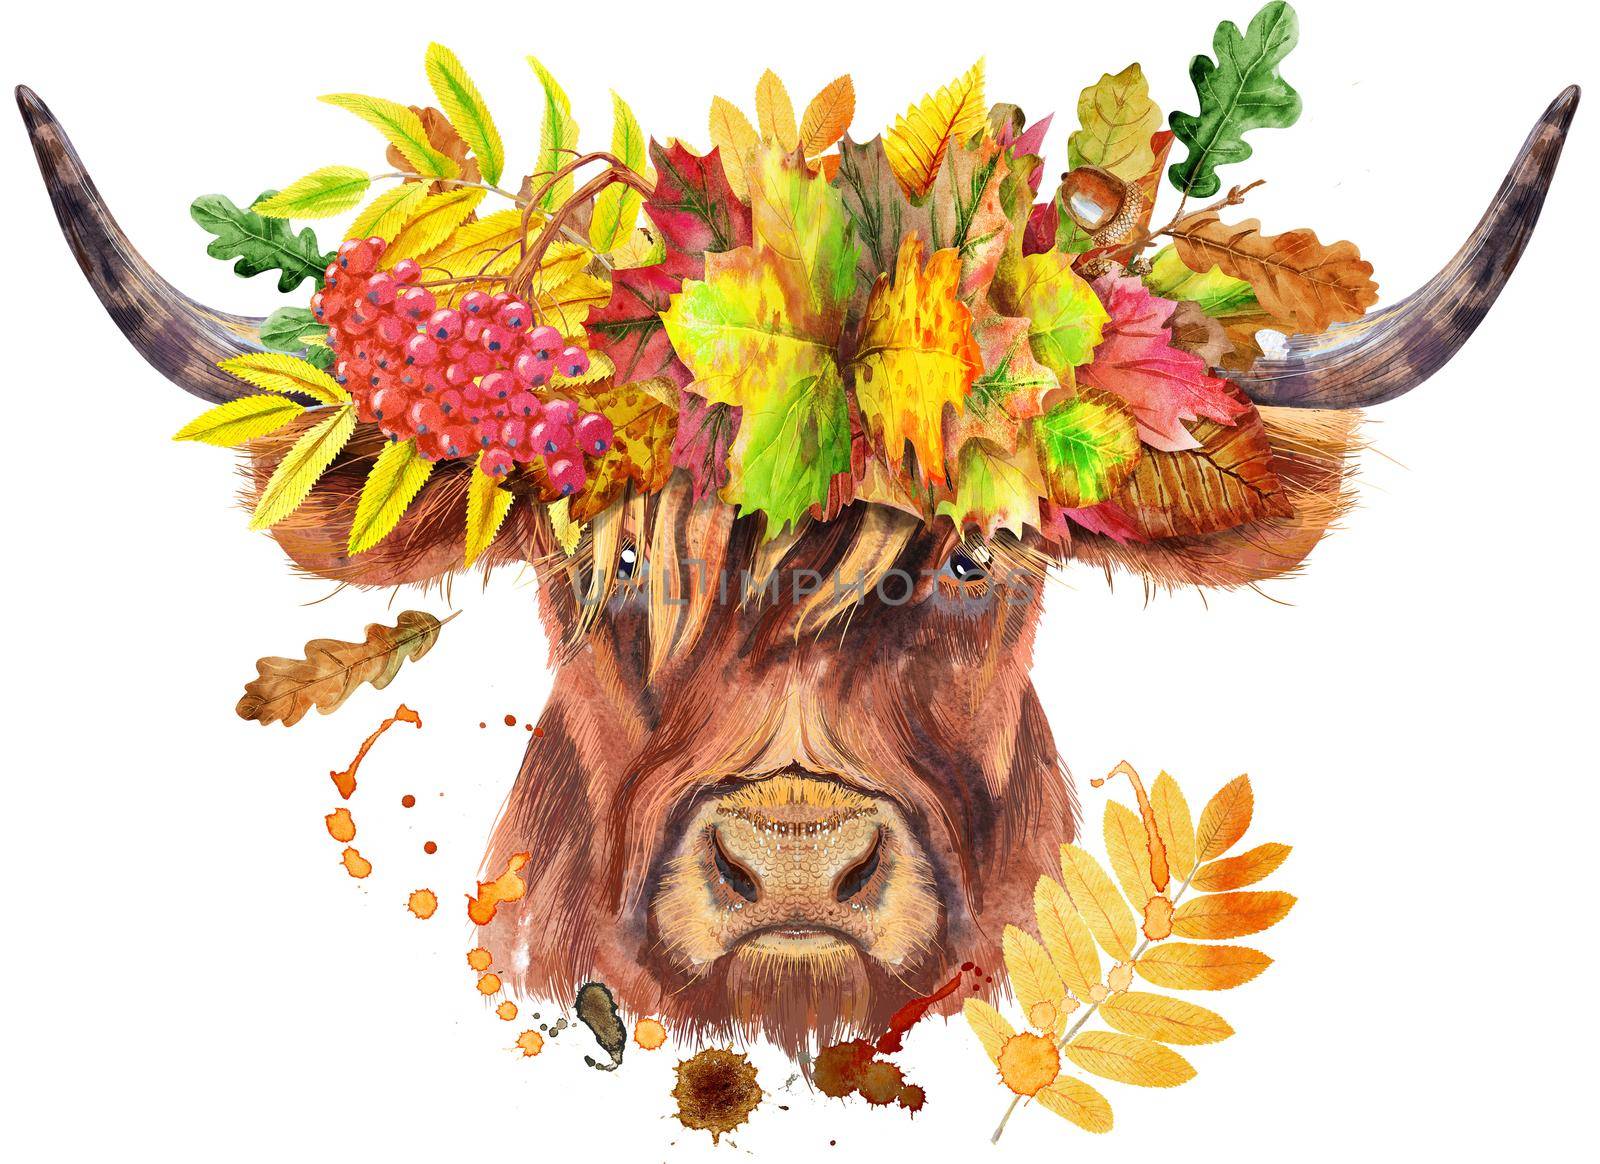 Bull in a wreath of autumn leaves watercolor graphics. Bull animal illustration with splash watercolor textured background.